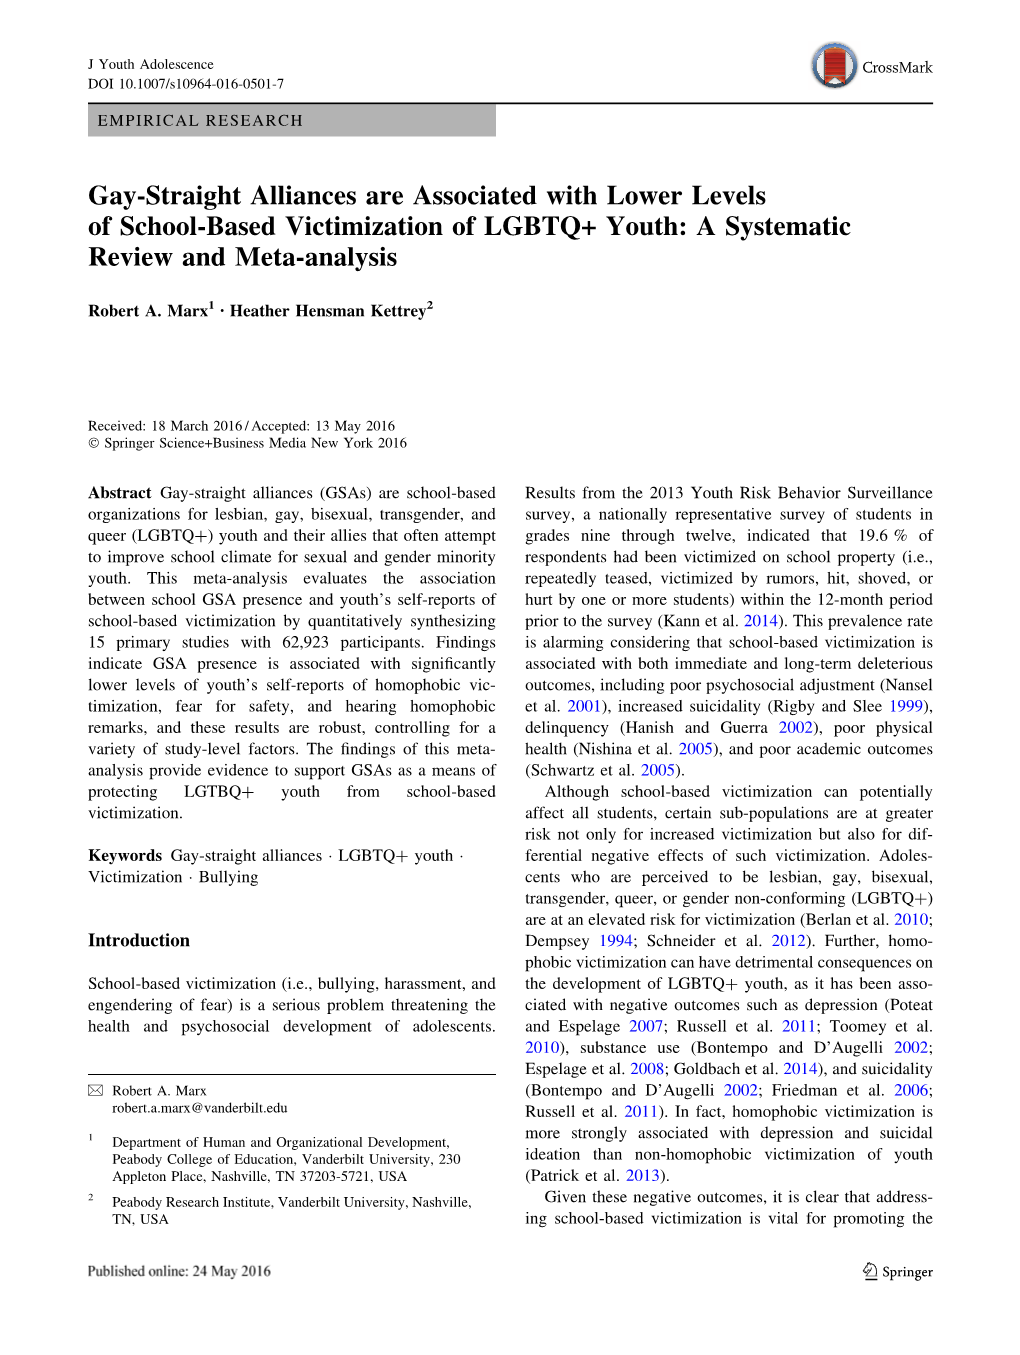 Gay-Straight Alliances Are Associated with Lower Levels of School-Based Victimization of LGBTQ+ Youth: a Systematic Review and Meta-Analysis